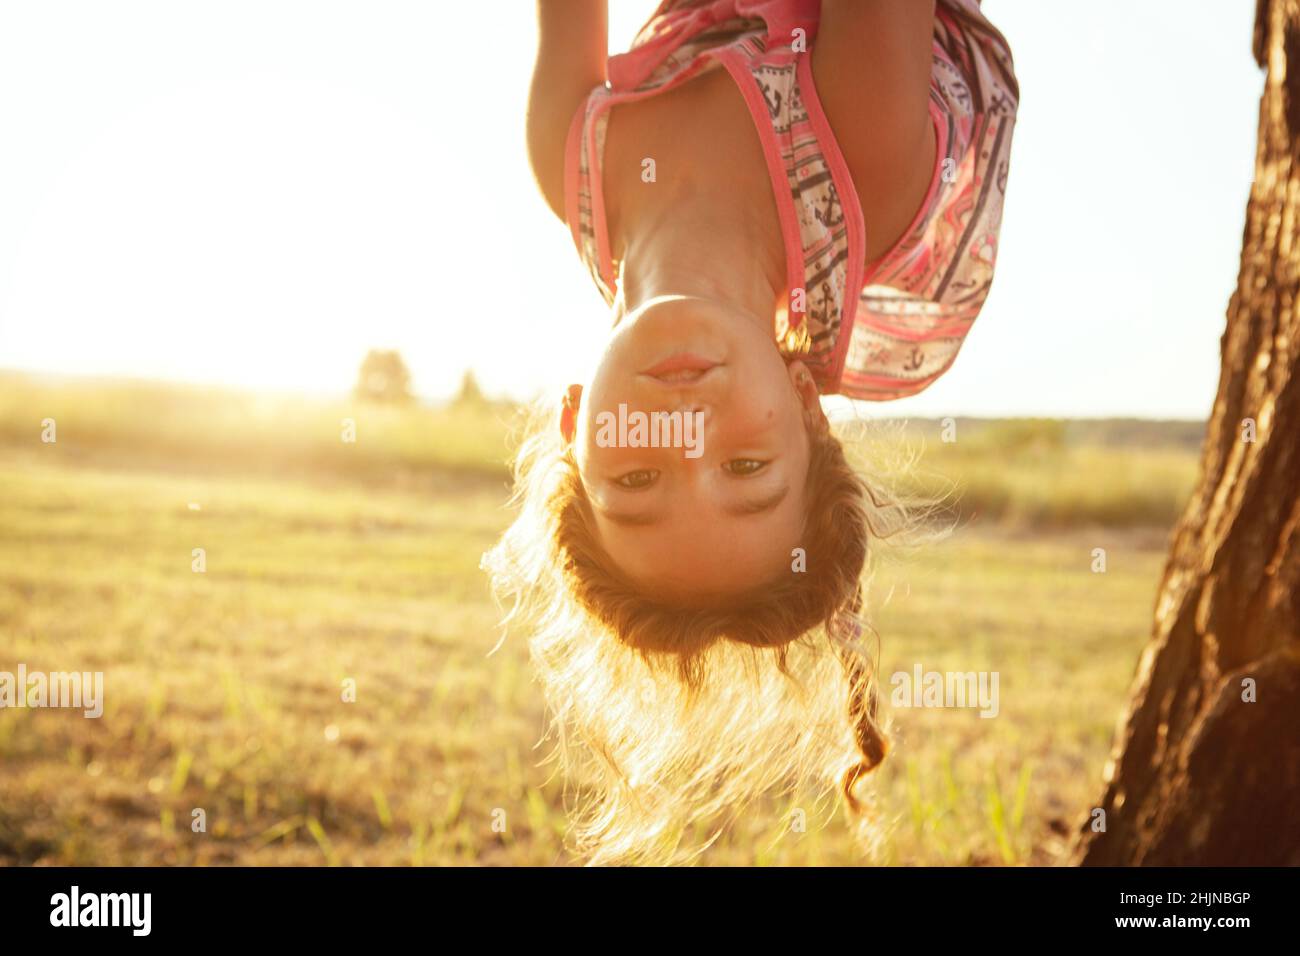 The girl is hanging upside down on a tree in summer in orange sunlight and a light dress. Summer time, heat, childhood. Funny portrait with disheveled Stock Photo